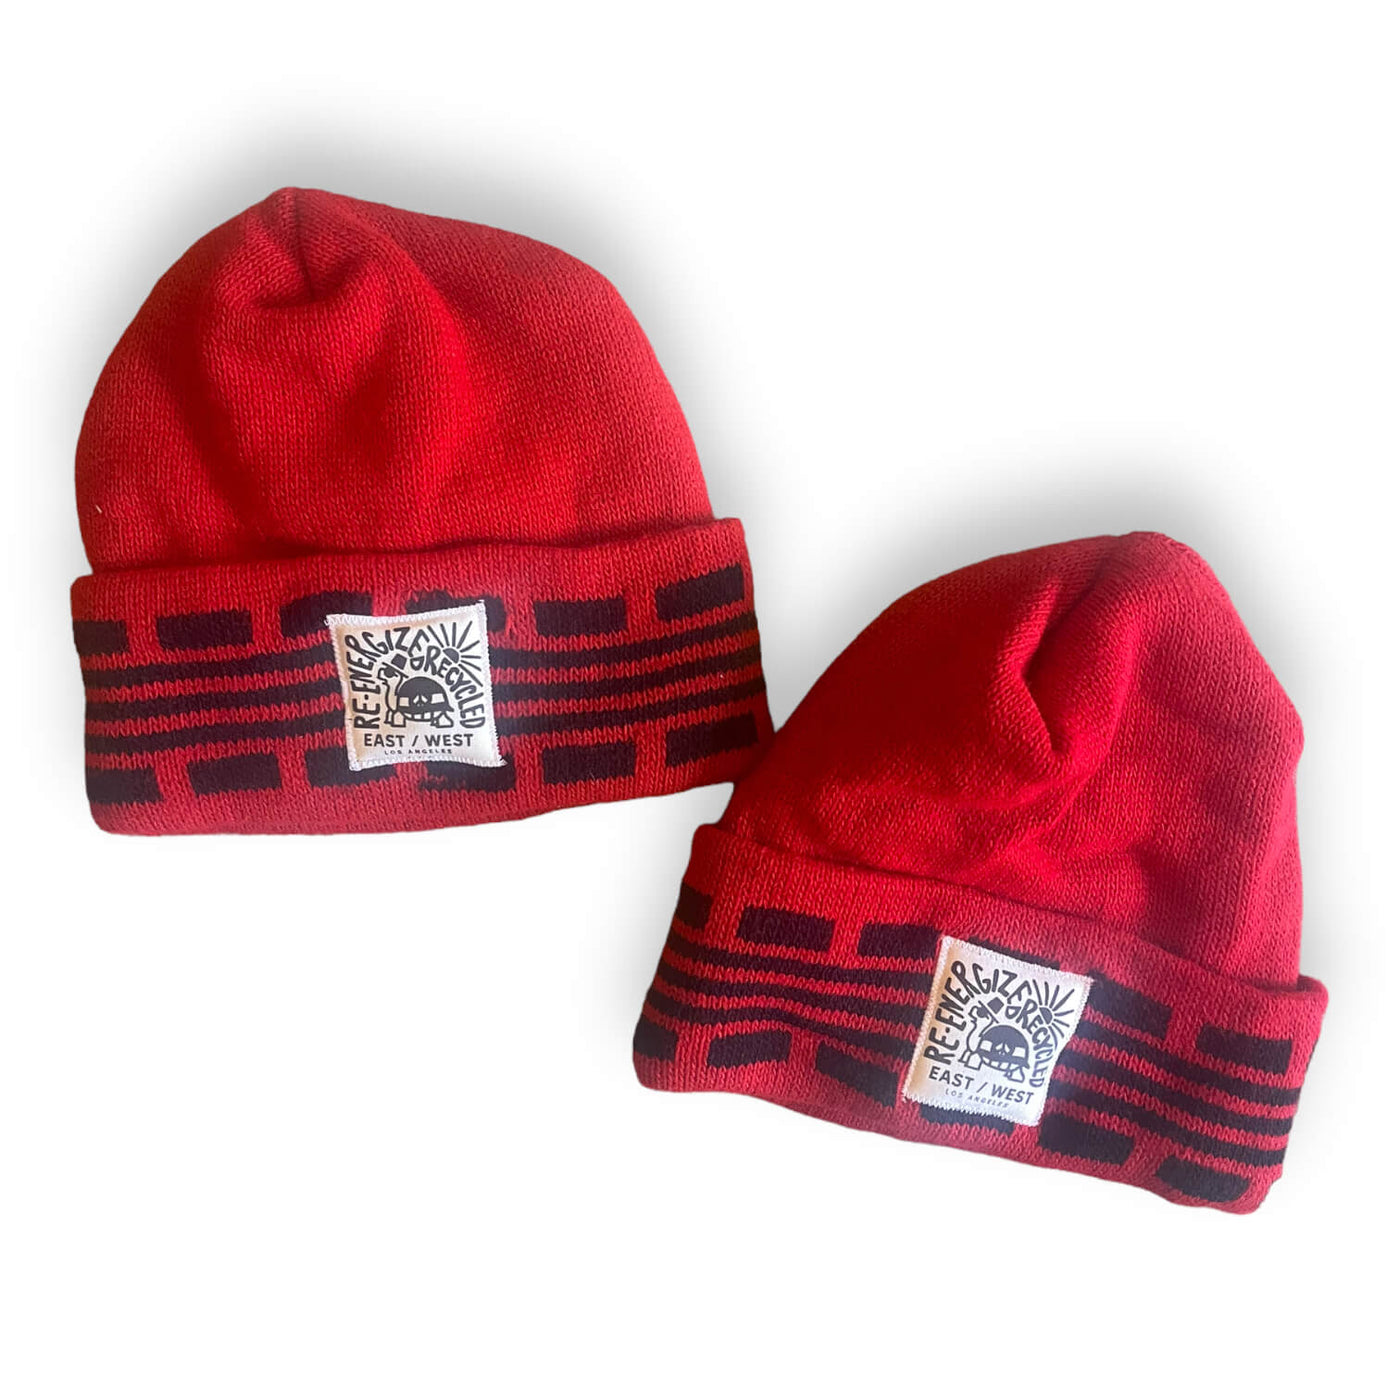 Deadstock Beanie - Patterned Red